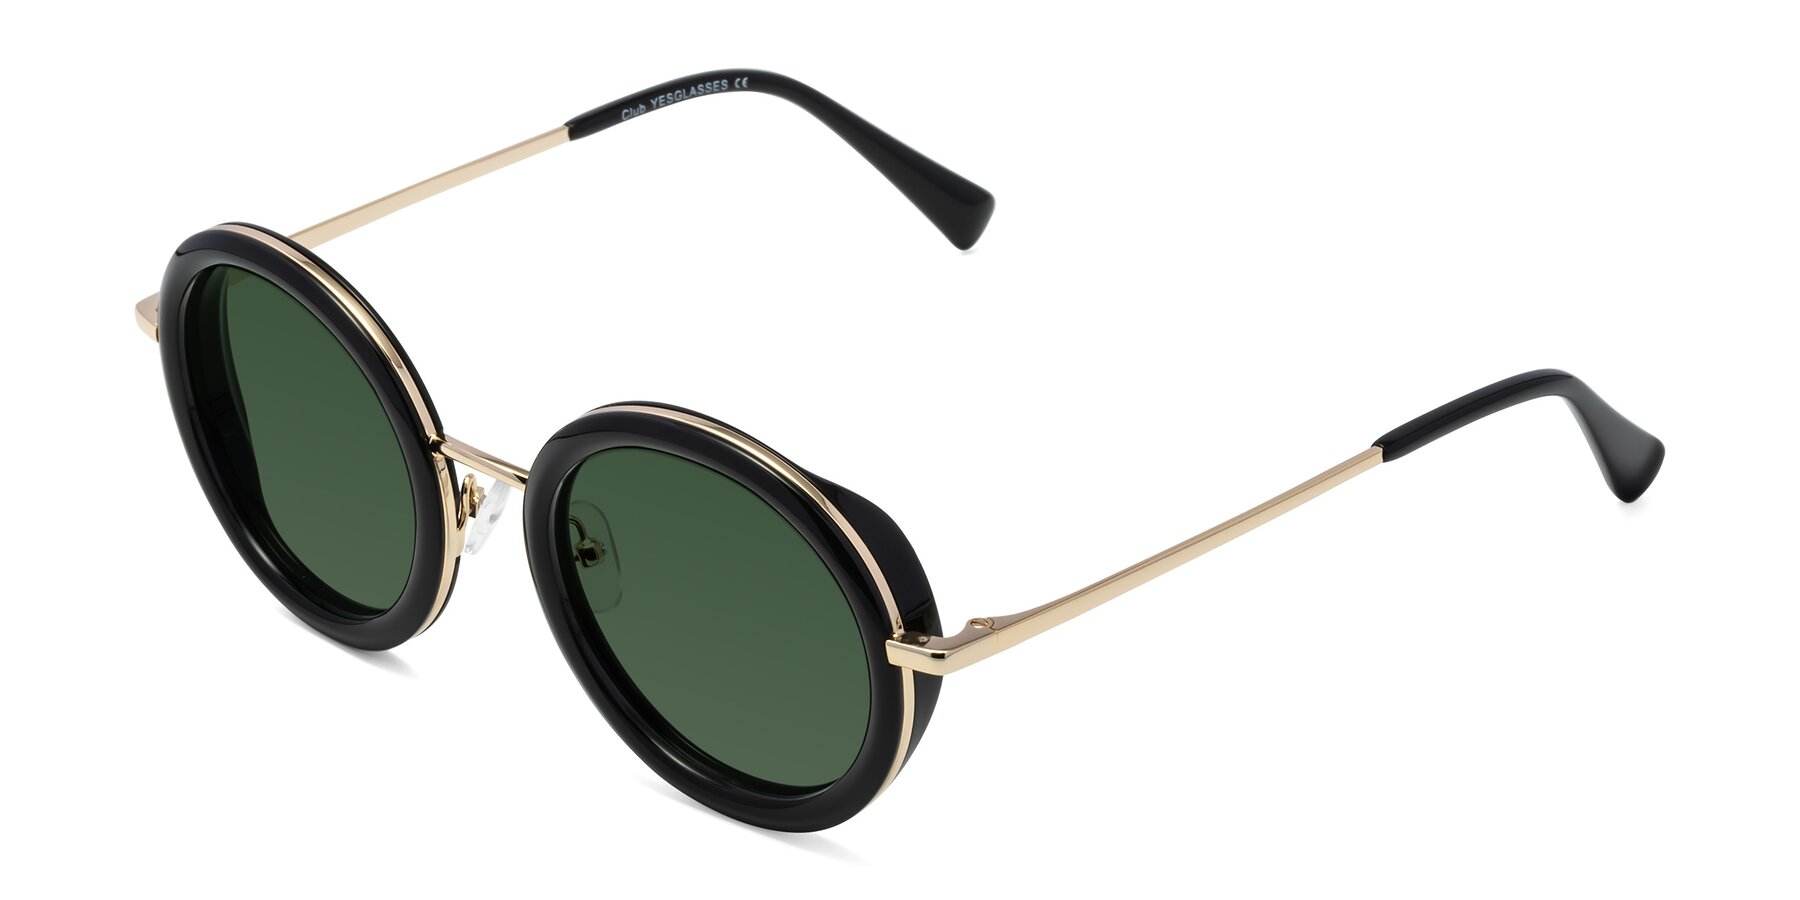 Angle of Club in Black-Gold with Green Tinted Lenses